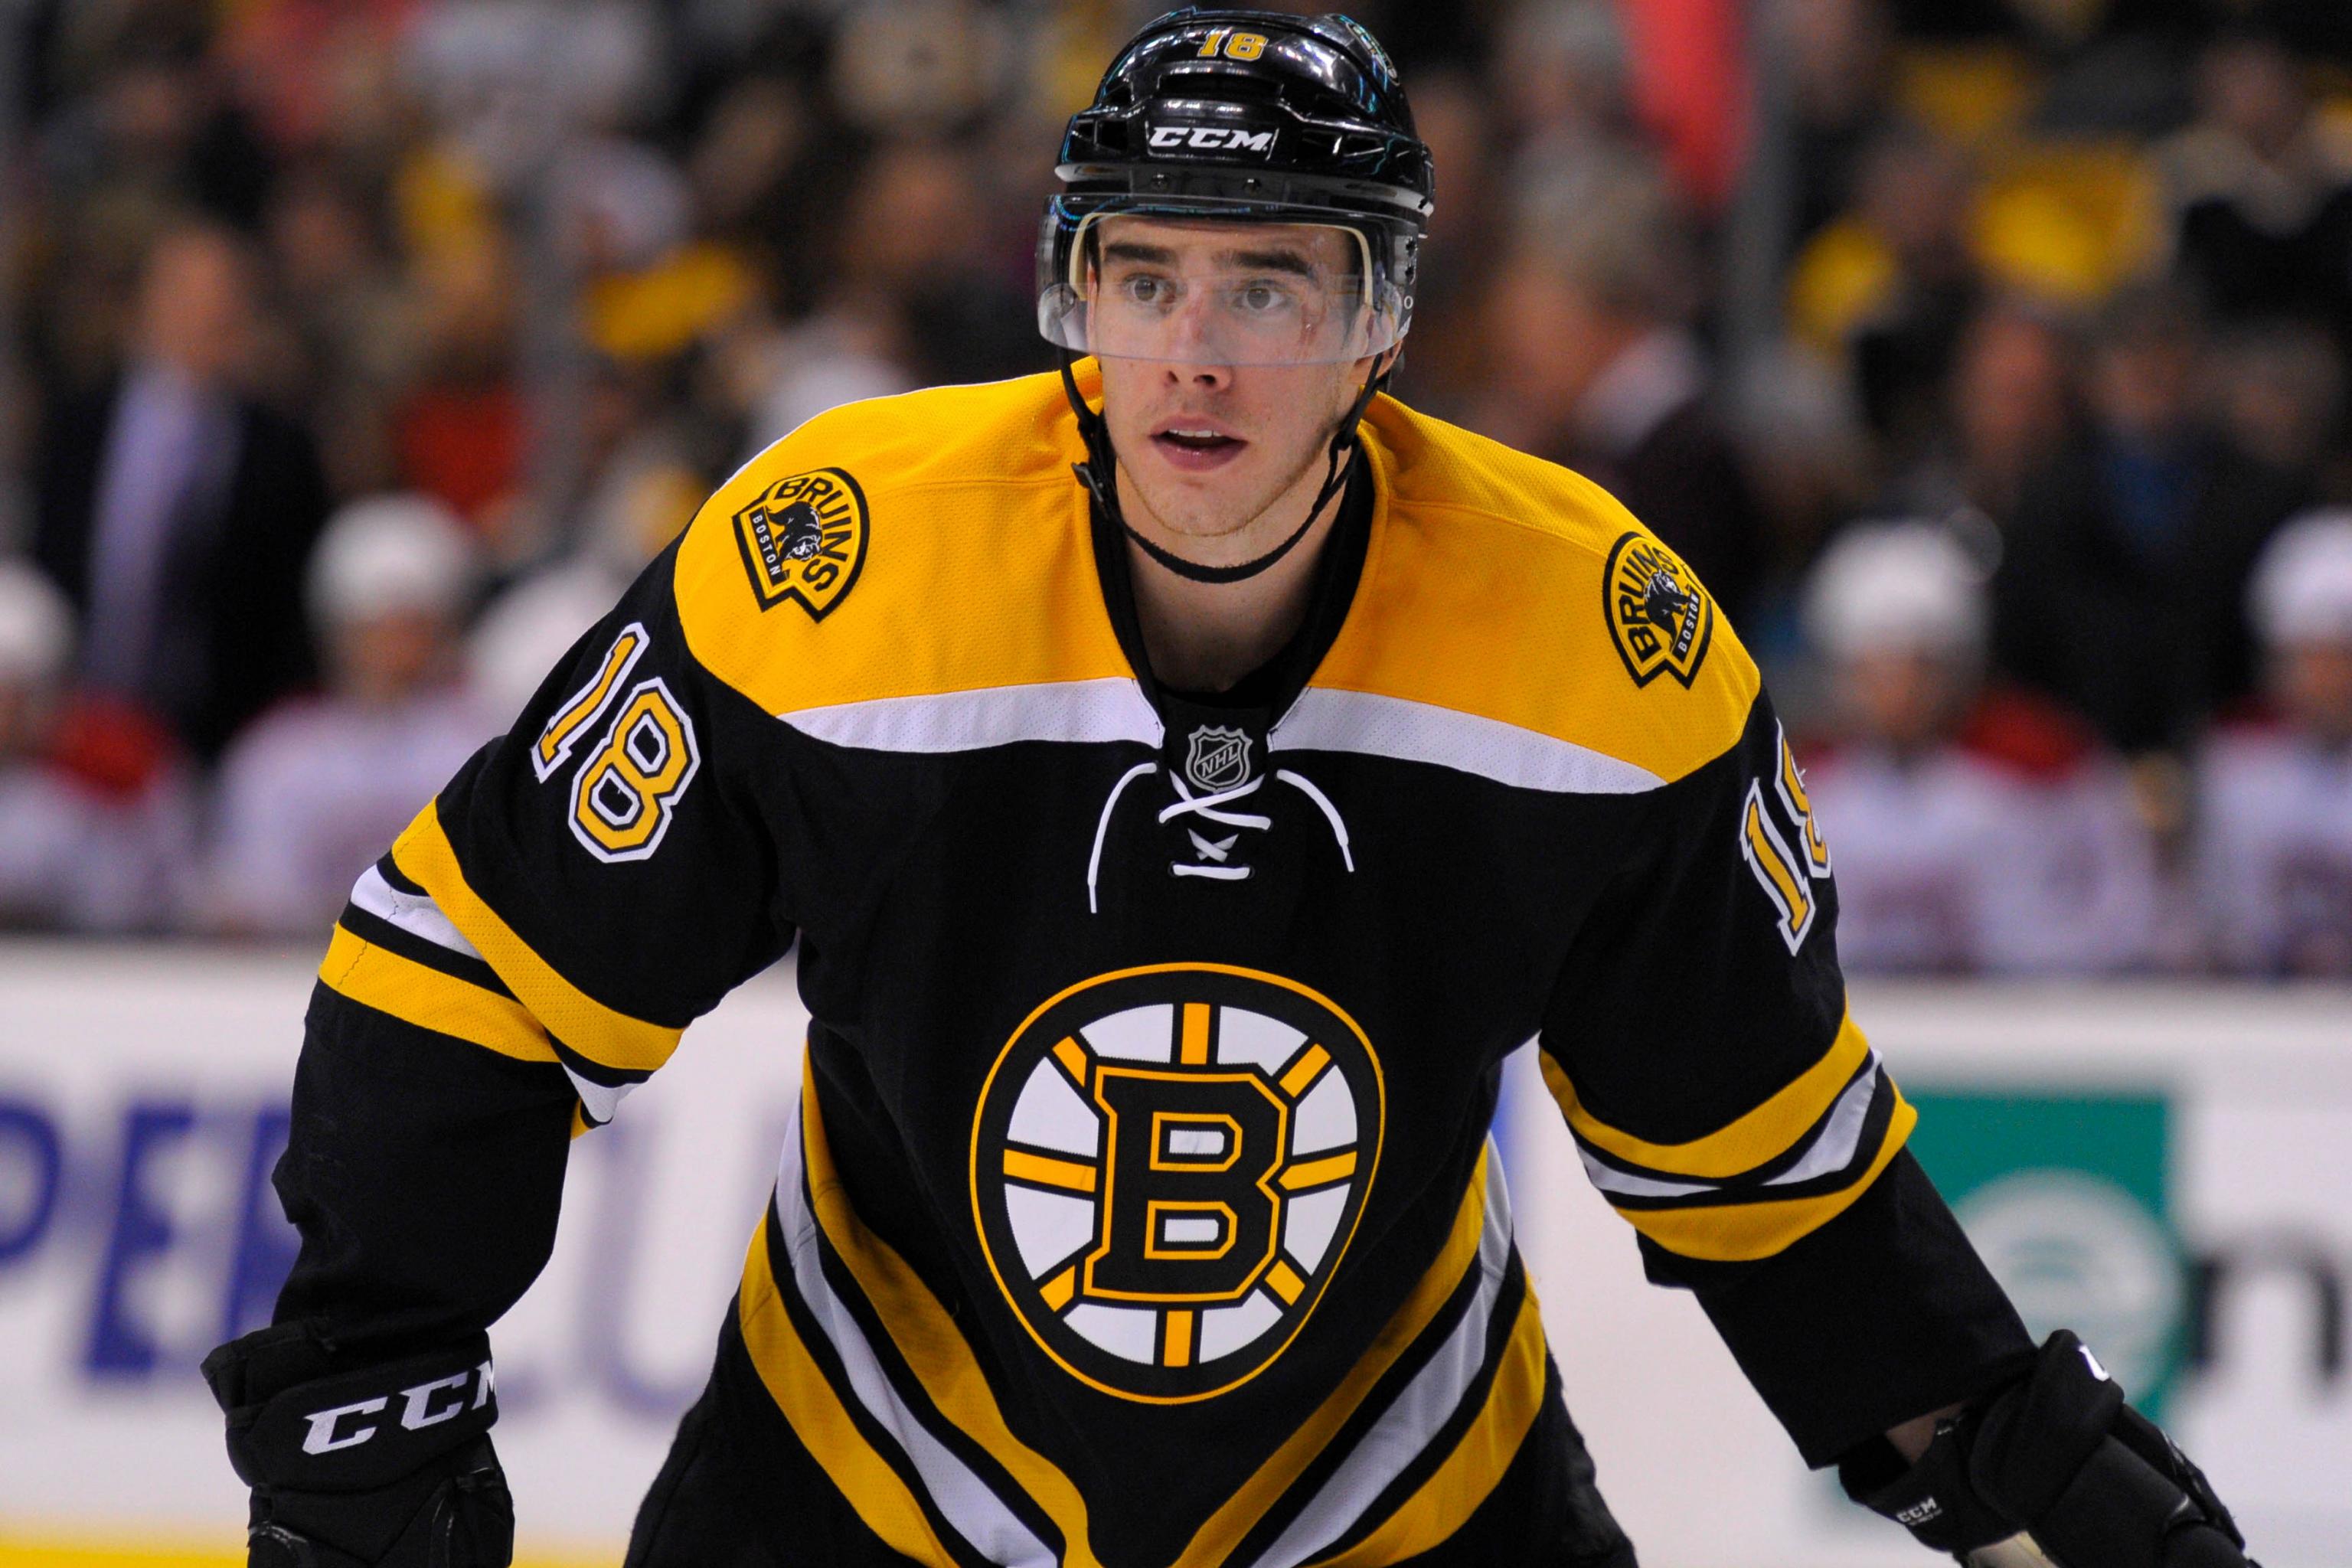 Boston Bruins' Reilly Smith making his point